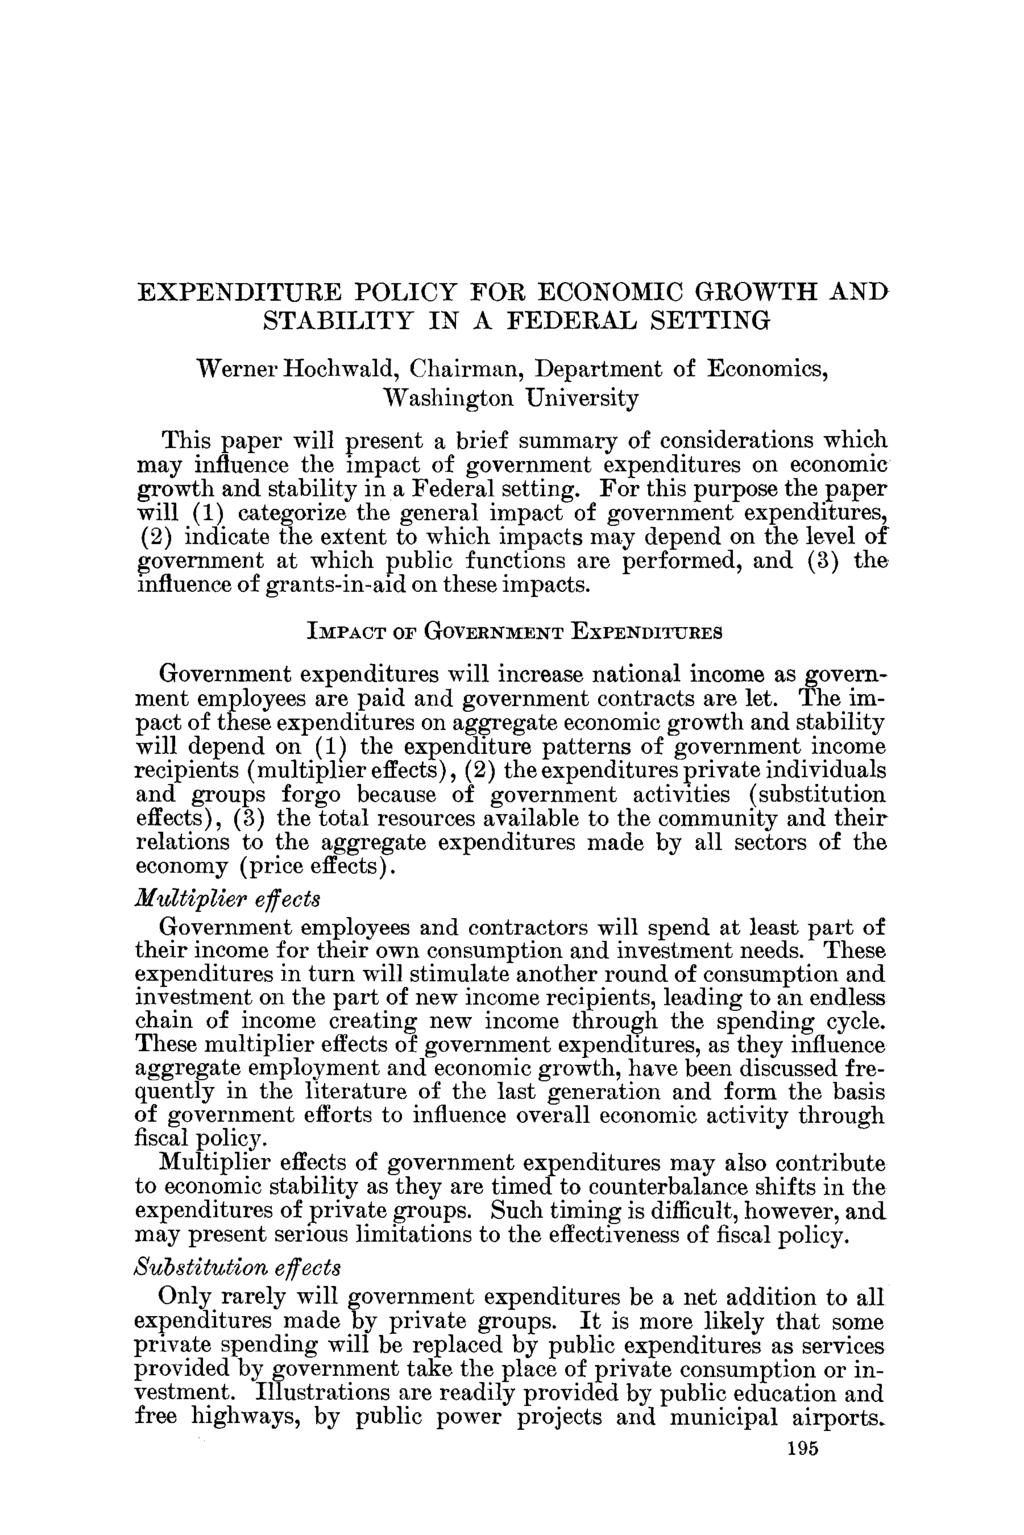 EXPENDITURE POLICY FOR ECONOMIC GROWTH AND STABILITY IN A FEDERAL SETTING Werner Hochwald, Chairman, Department of Economics, Washington University This paper will present a brief summary of